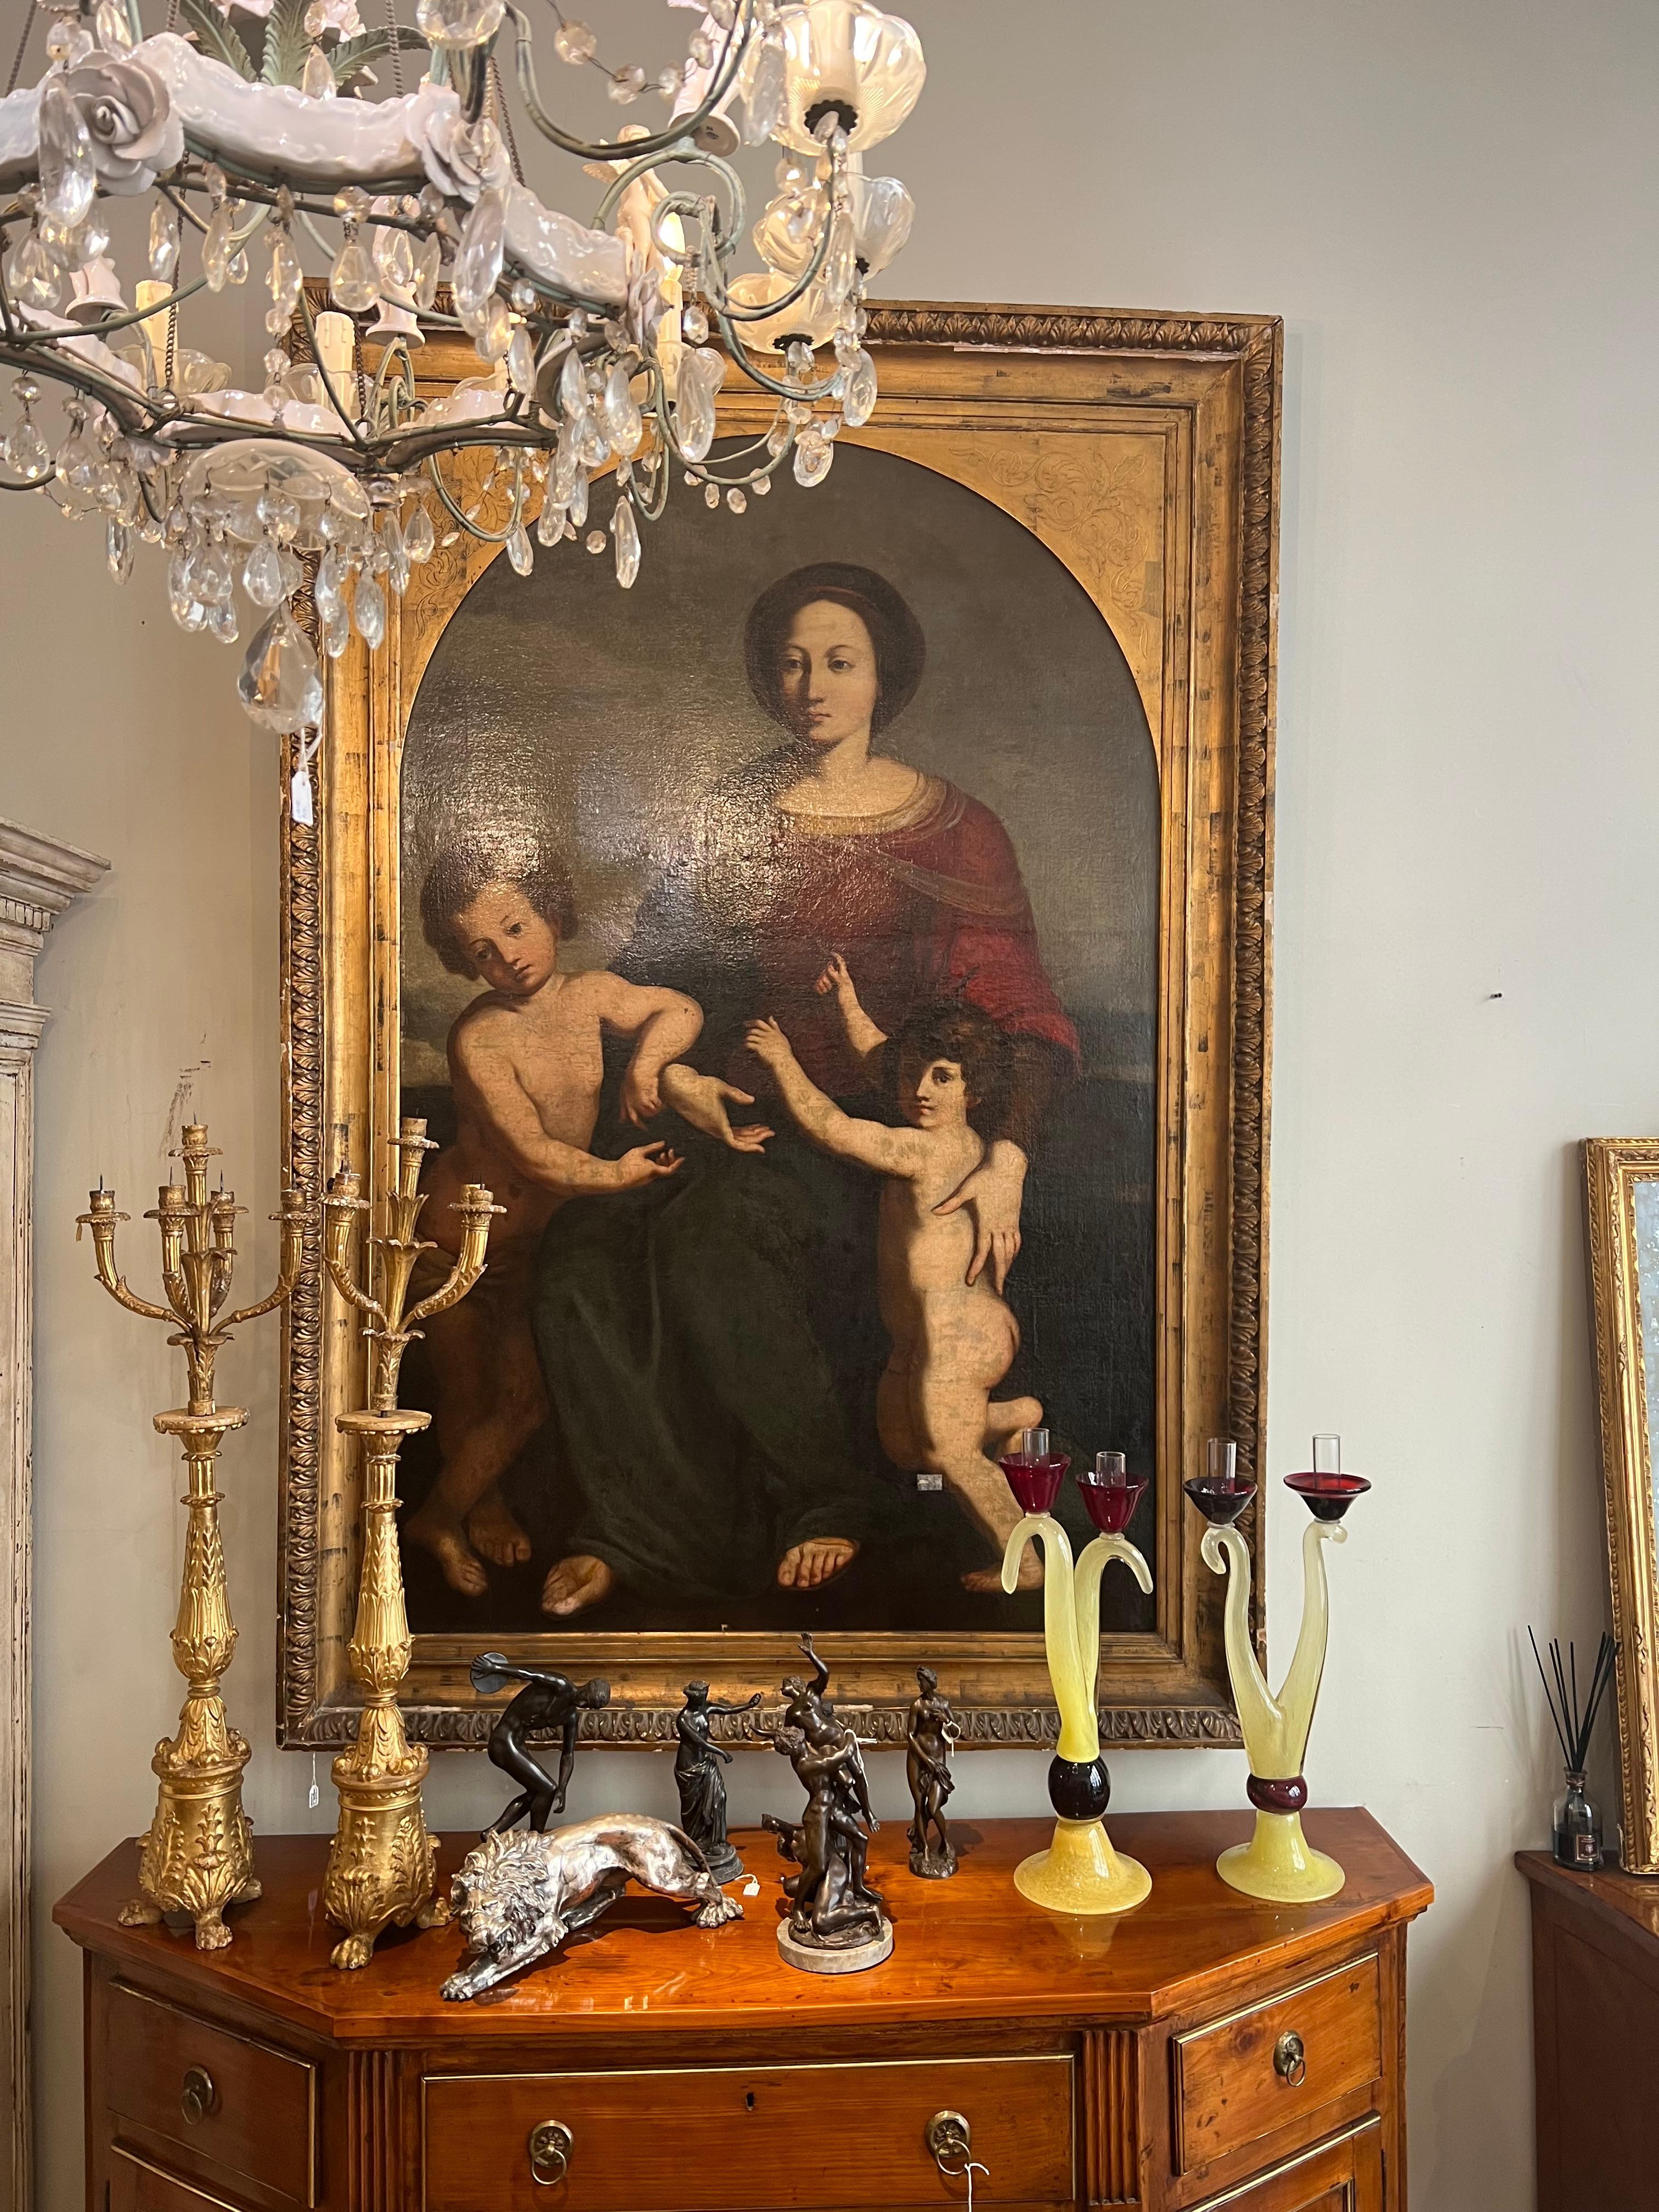 Large oil painting on canvas depicting the Madonna with Child and San Giovannino within a carved and gilded wooden frame.
The subject is particular as it leaves the classic canons of the representation of Maternity by presenting a Madonna without a